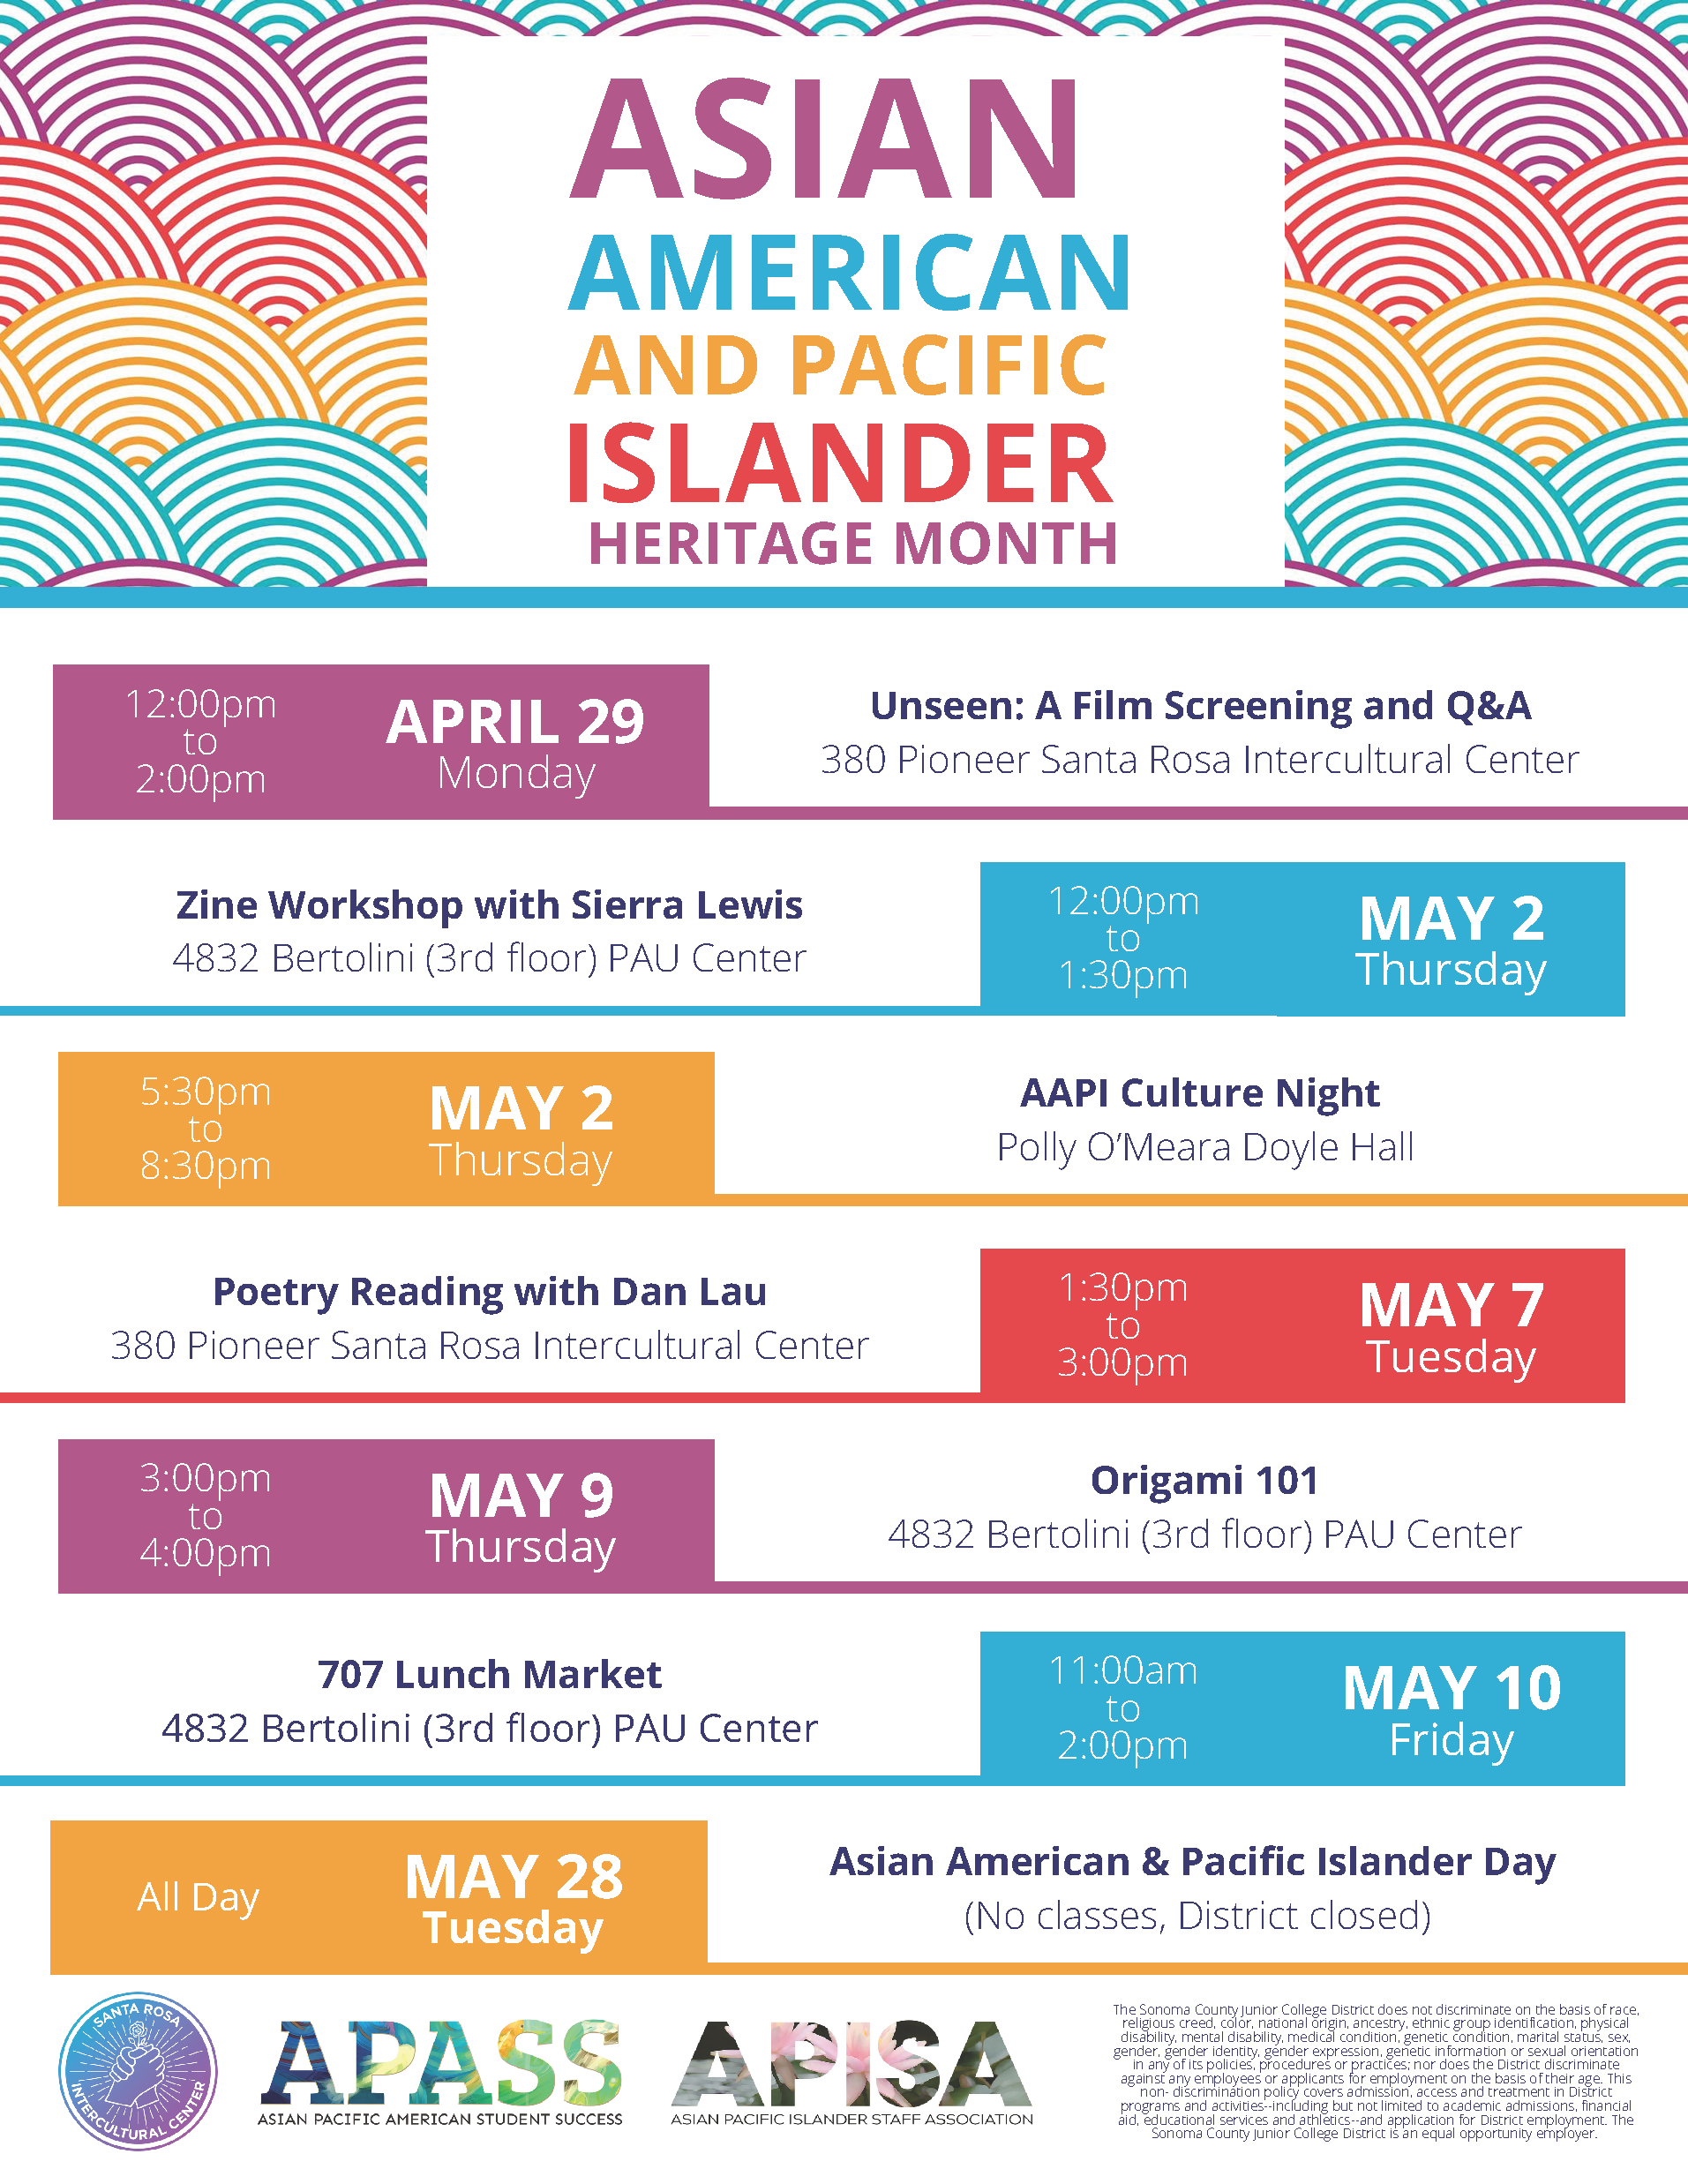 Join us for these 6 different events that celebrate the achievements, contributions, and history of Asian Pacific Islander Americans in the United States. https://intercultural.santarosa.edu/APIhm